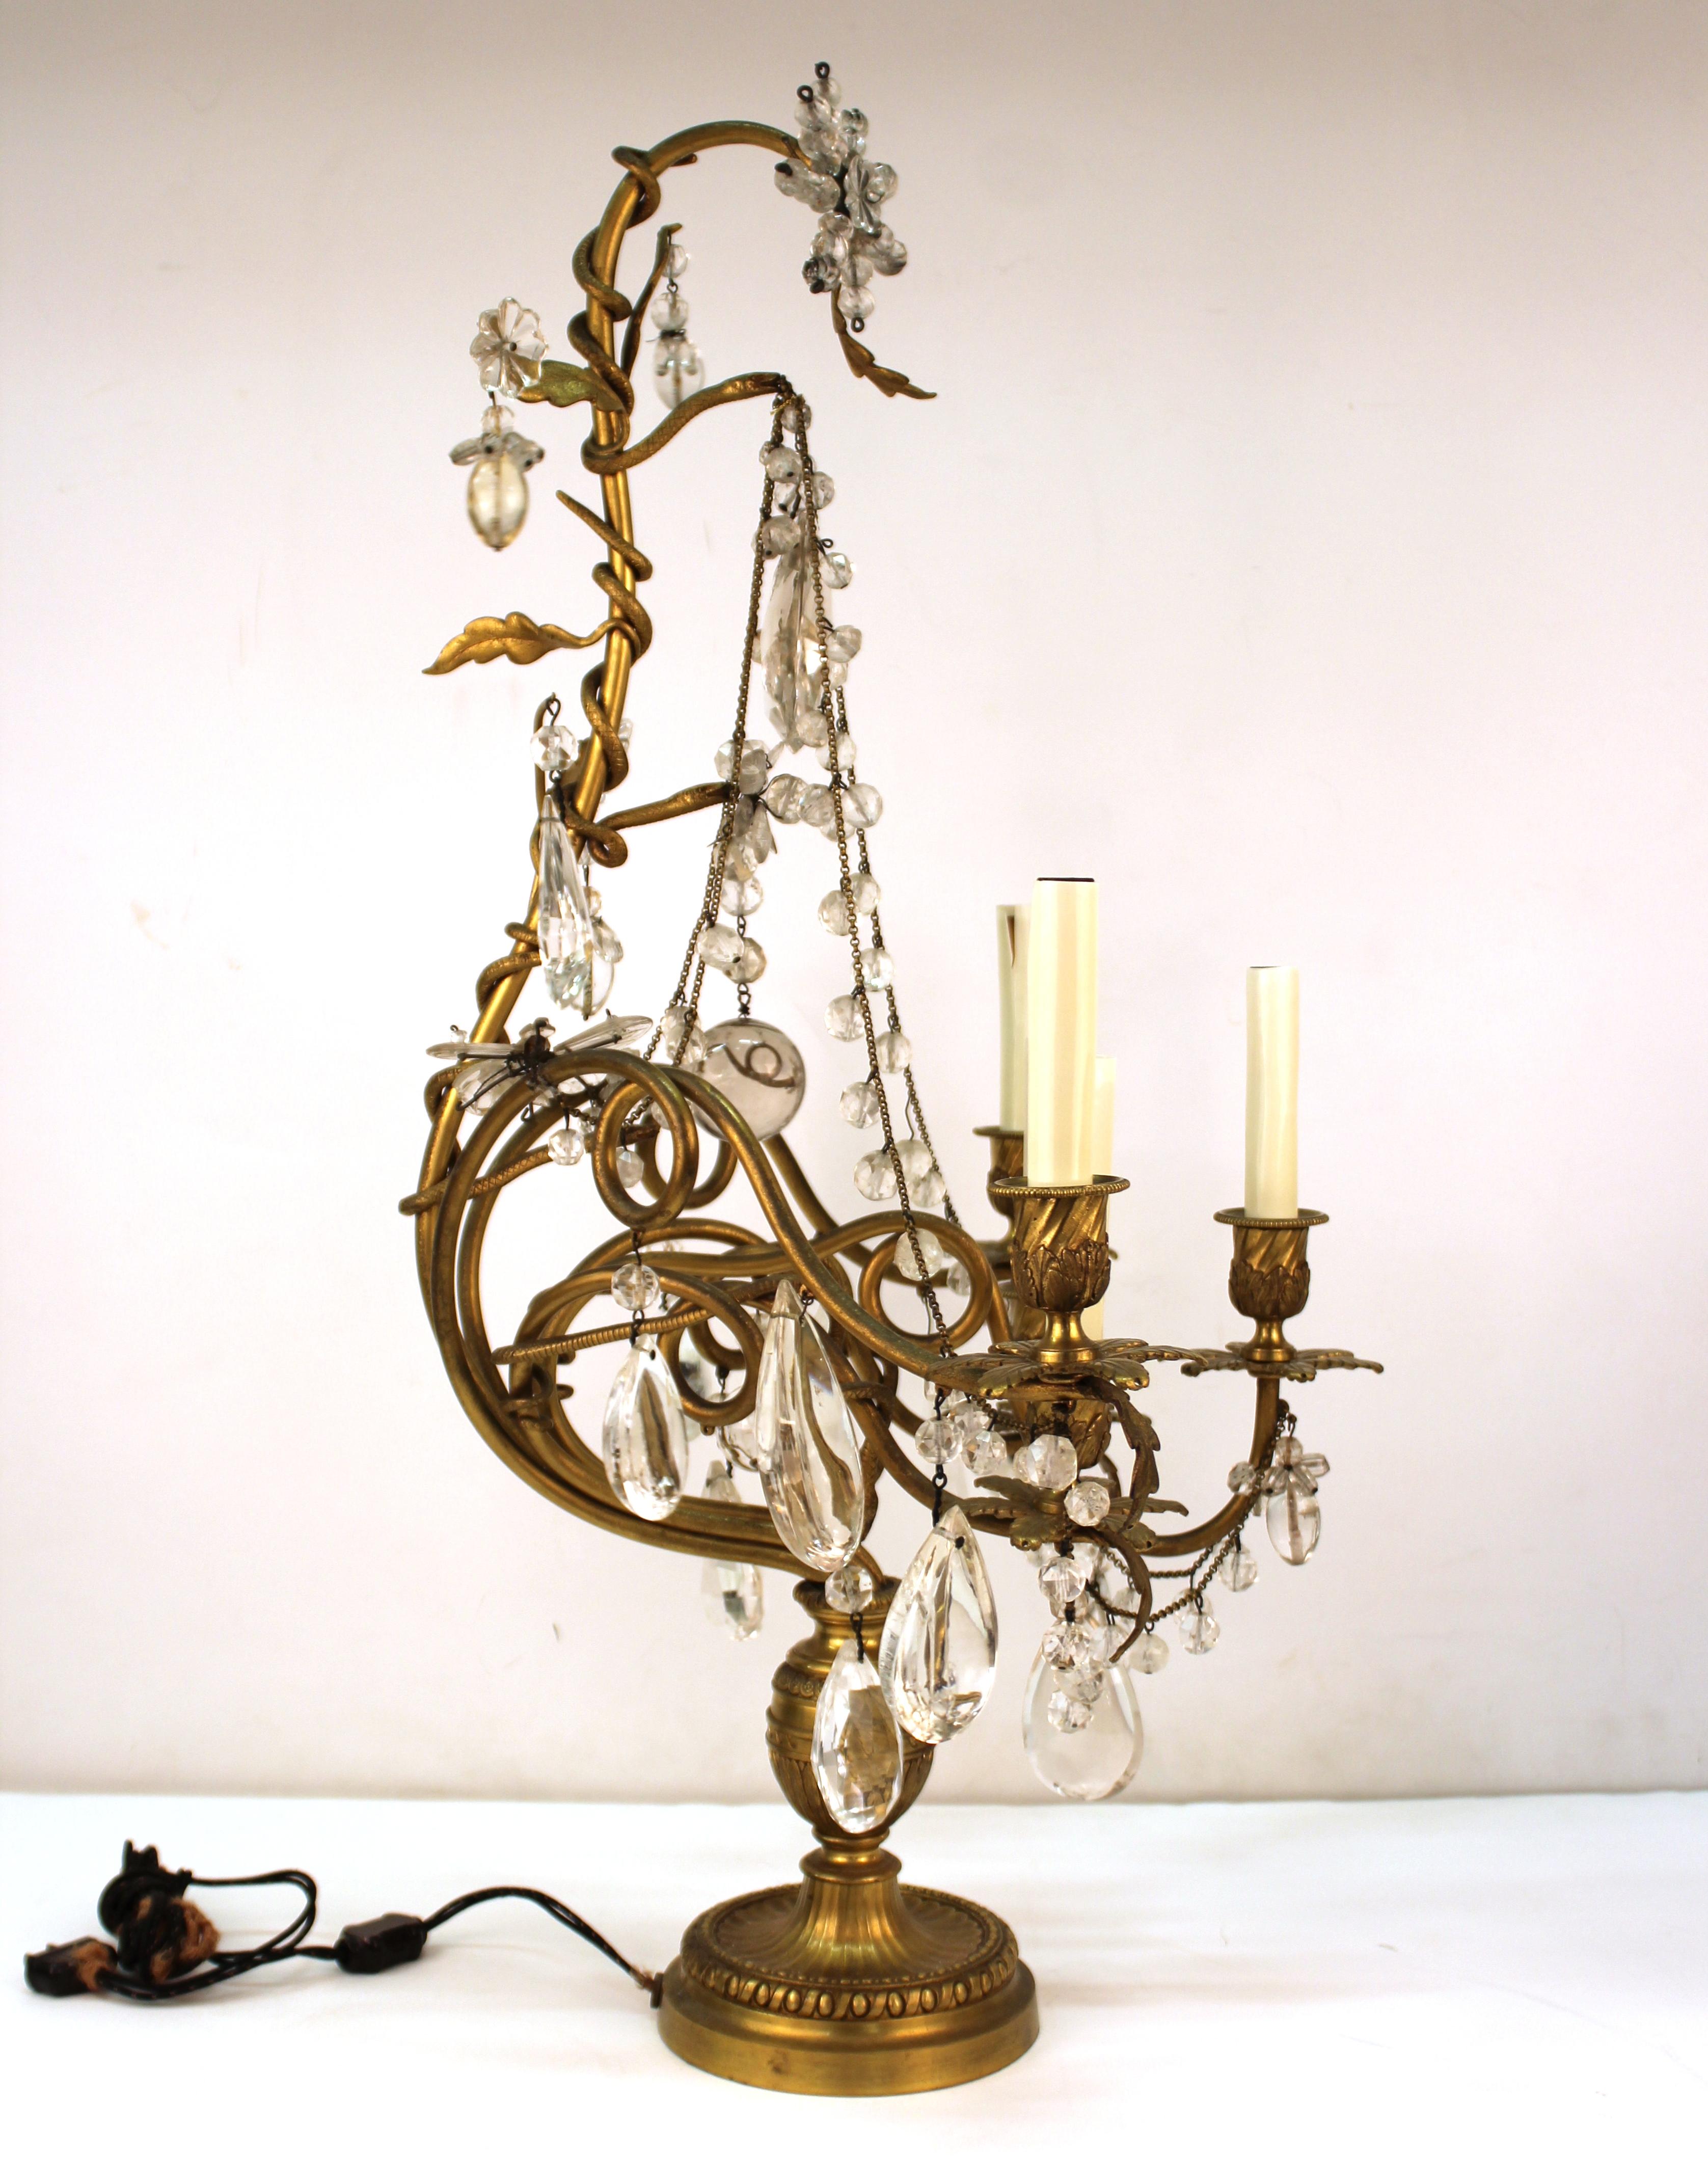 European Rococo Style Bronze Girandole Table Lamps with Snakes and Crystals